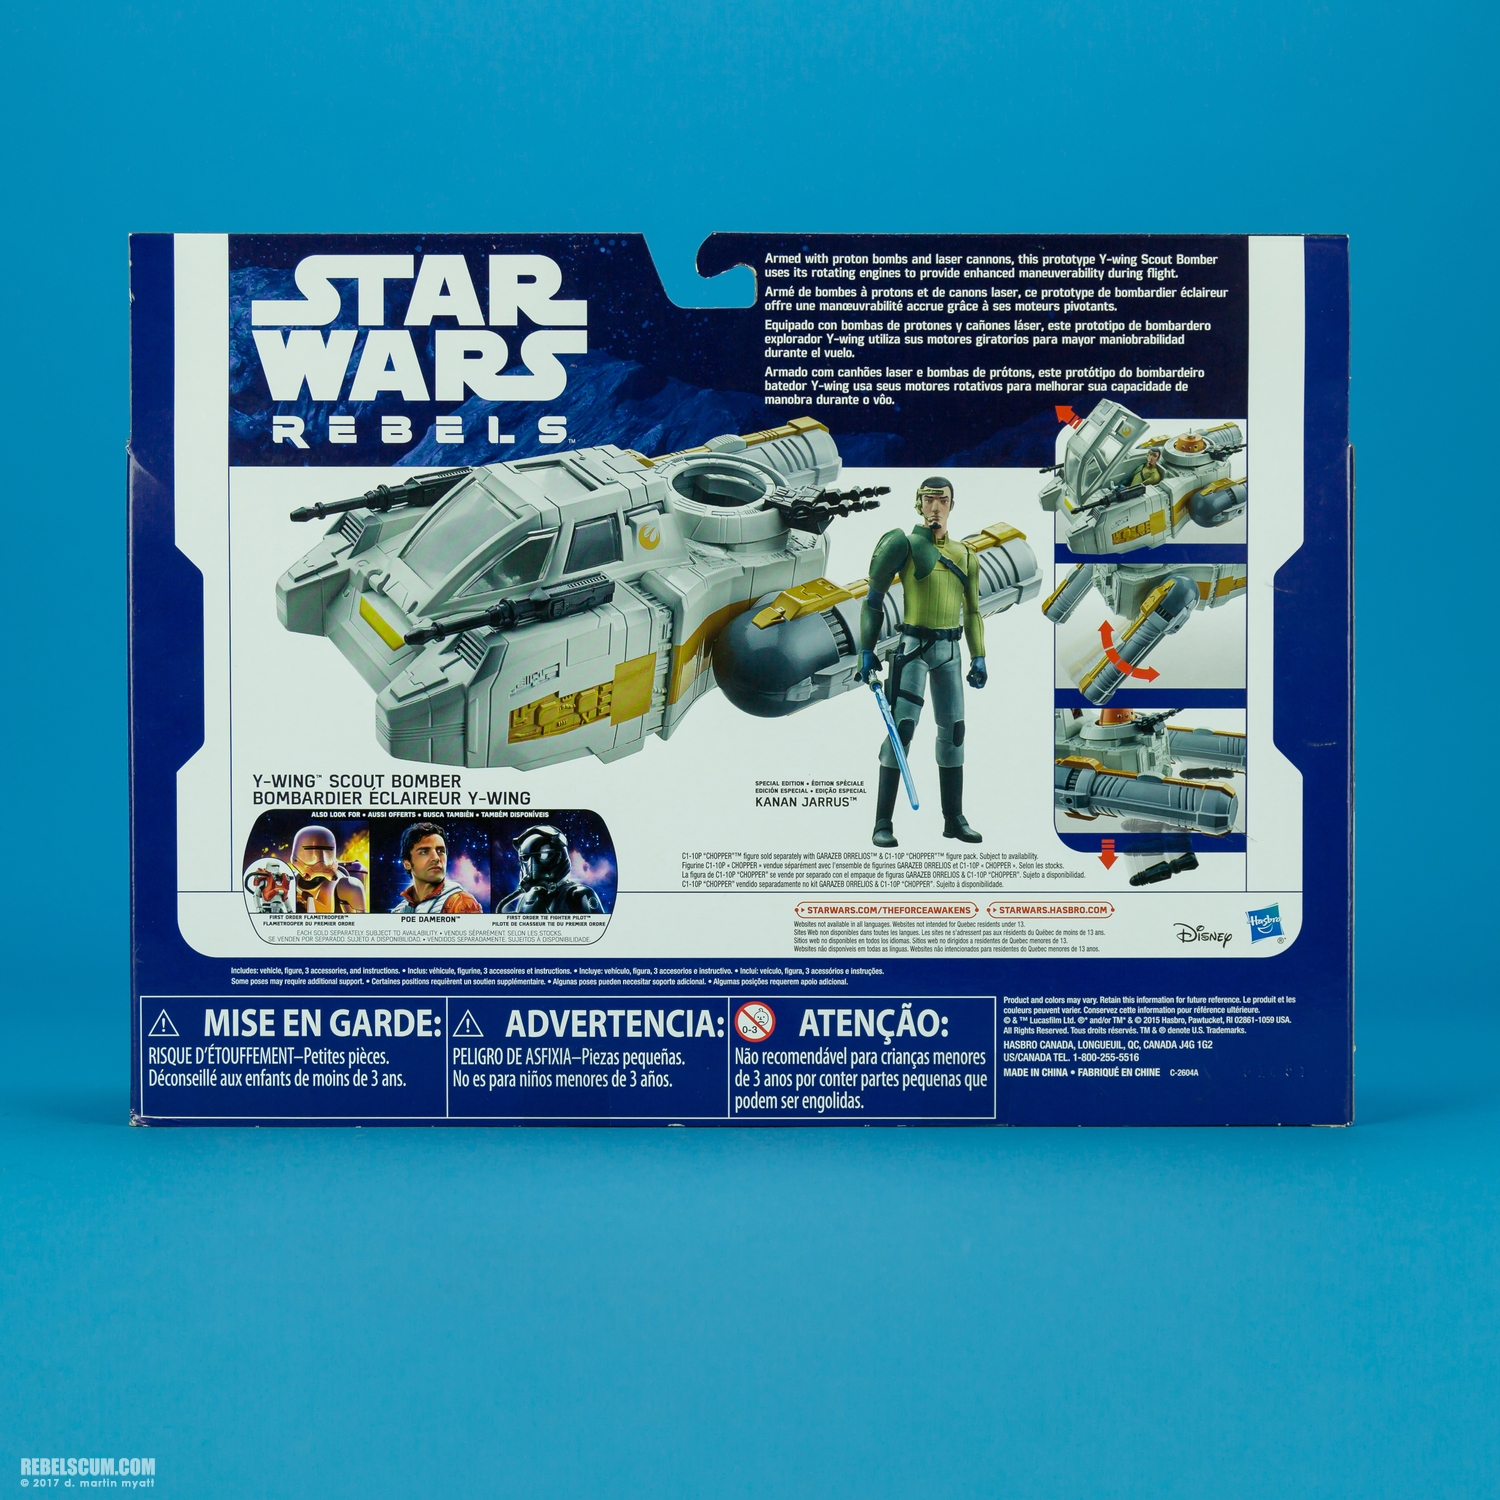 Y-Wing-Scout-Bomber-The-Force-Awakens-B3677-B3675-020.jpg